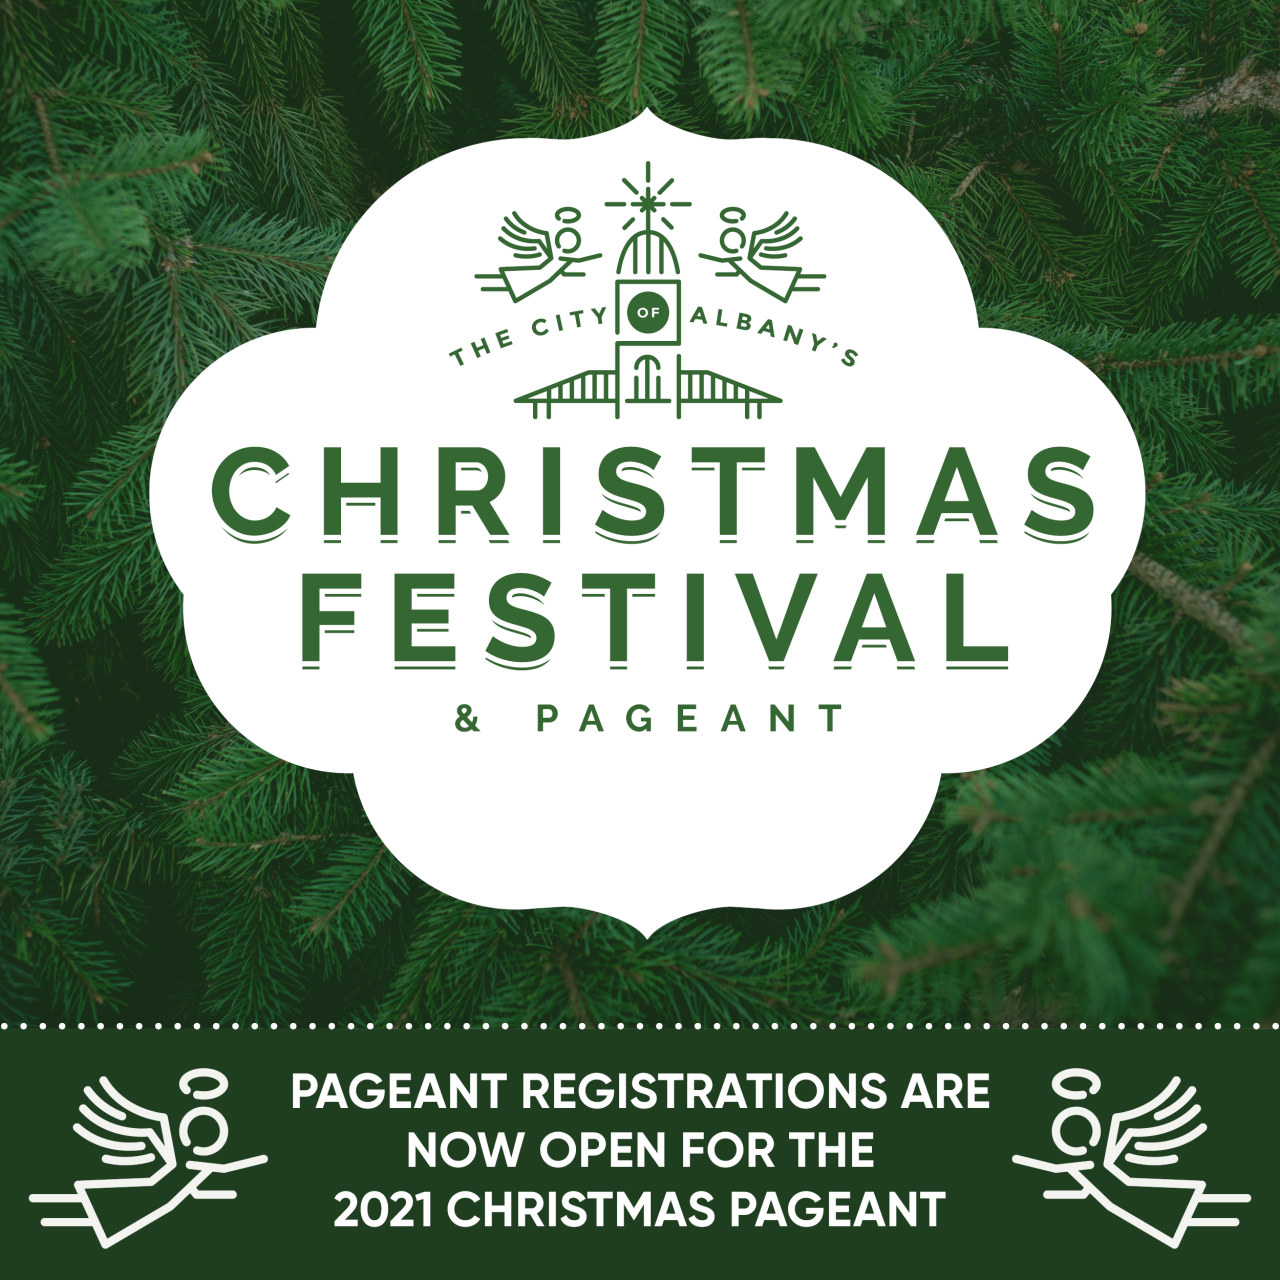 2021 Christmas Pageant registrations now open